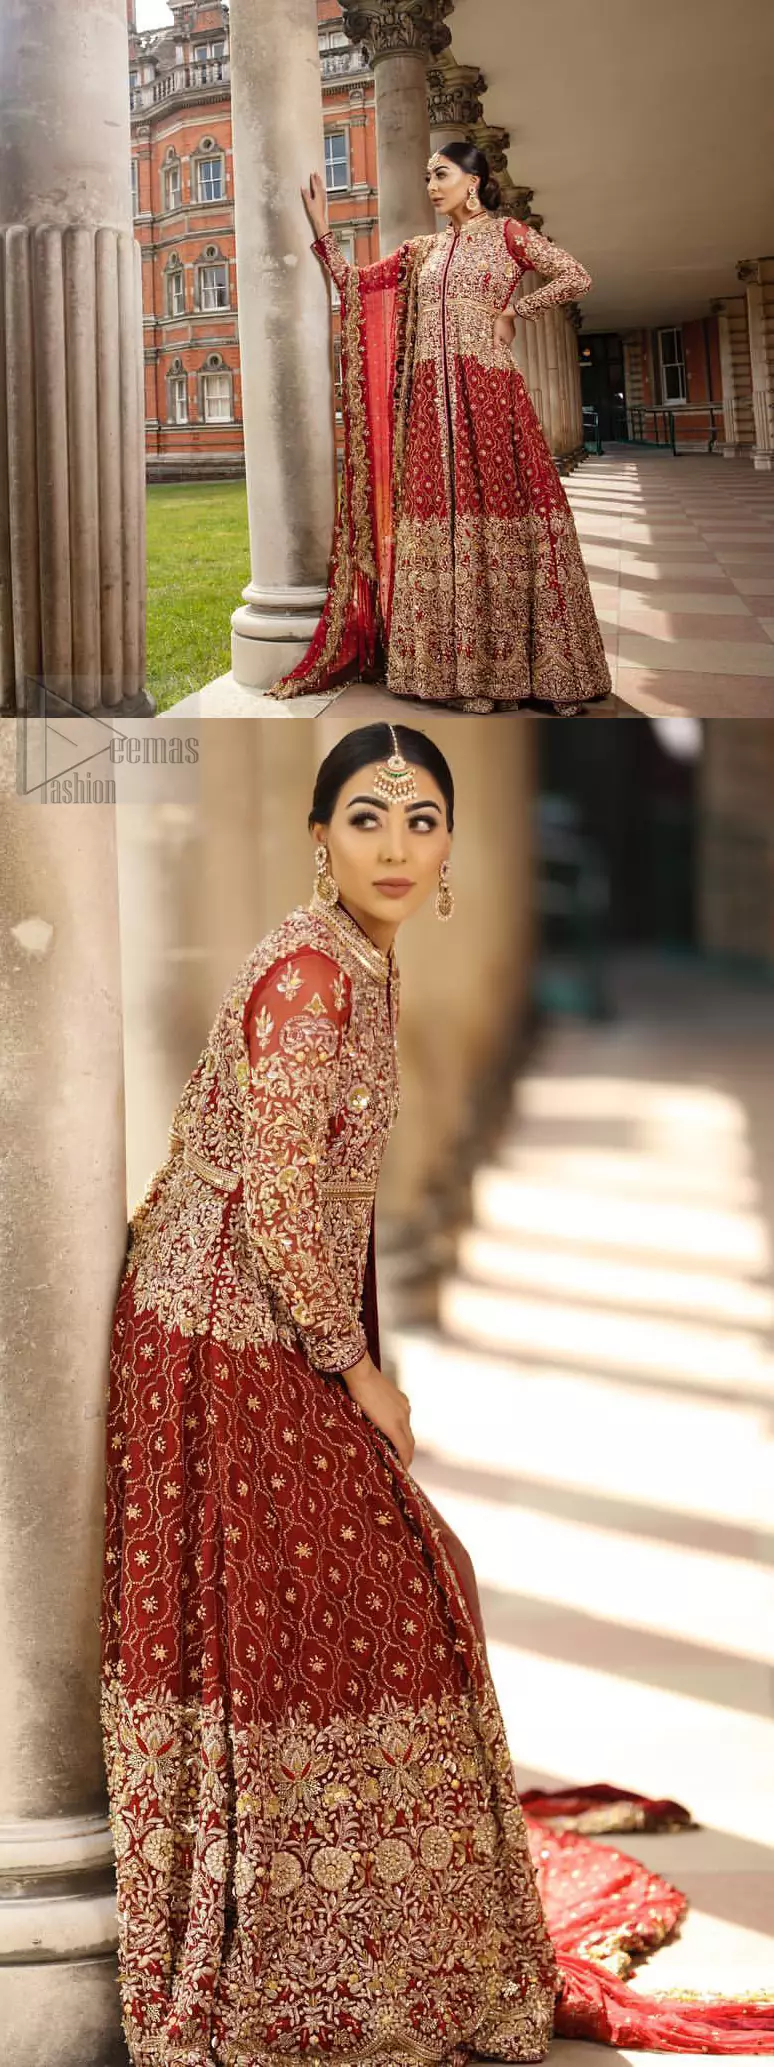 Crafted with love. Make your big day more beautiful with our excessively embroidered front open gown featuring delicately embellished neckline along with geometric patterns highlighted in zardozi detailing and intricately embroidered bottom that gives perfect ending to this outfit. Crafted artfully with golden kora, dabka, tilla, sequins and thread work. The embellished alluring scalloped borders dupatta gives the perfect ending to this peplum. The dupatta is furthermore enhanced with dangling tassels and multiple color thread embroidery.